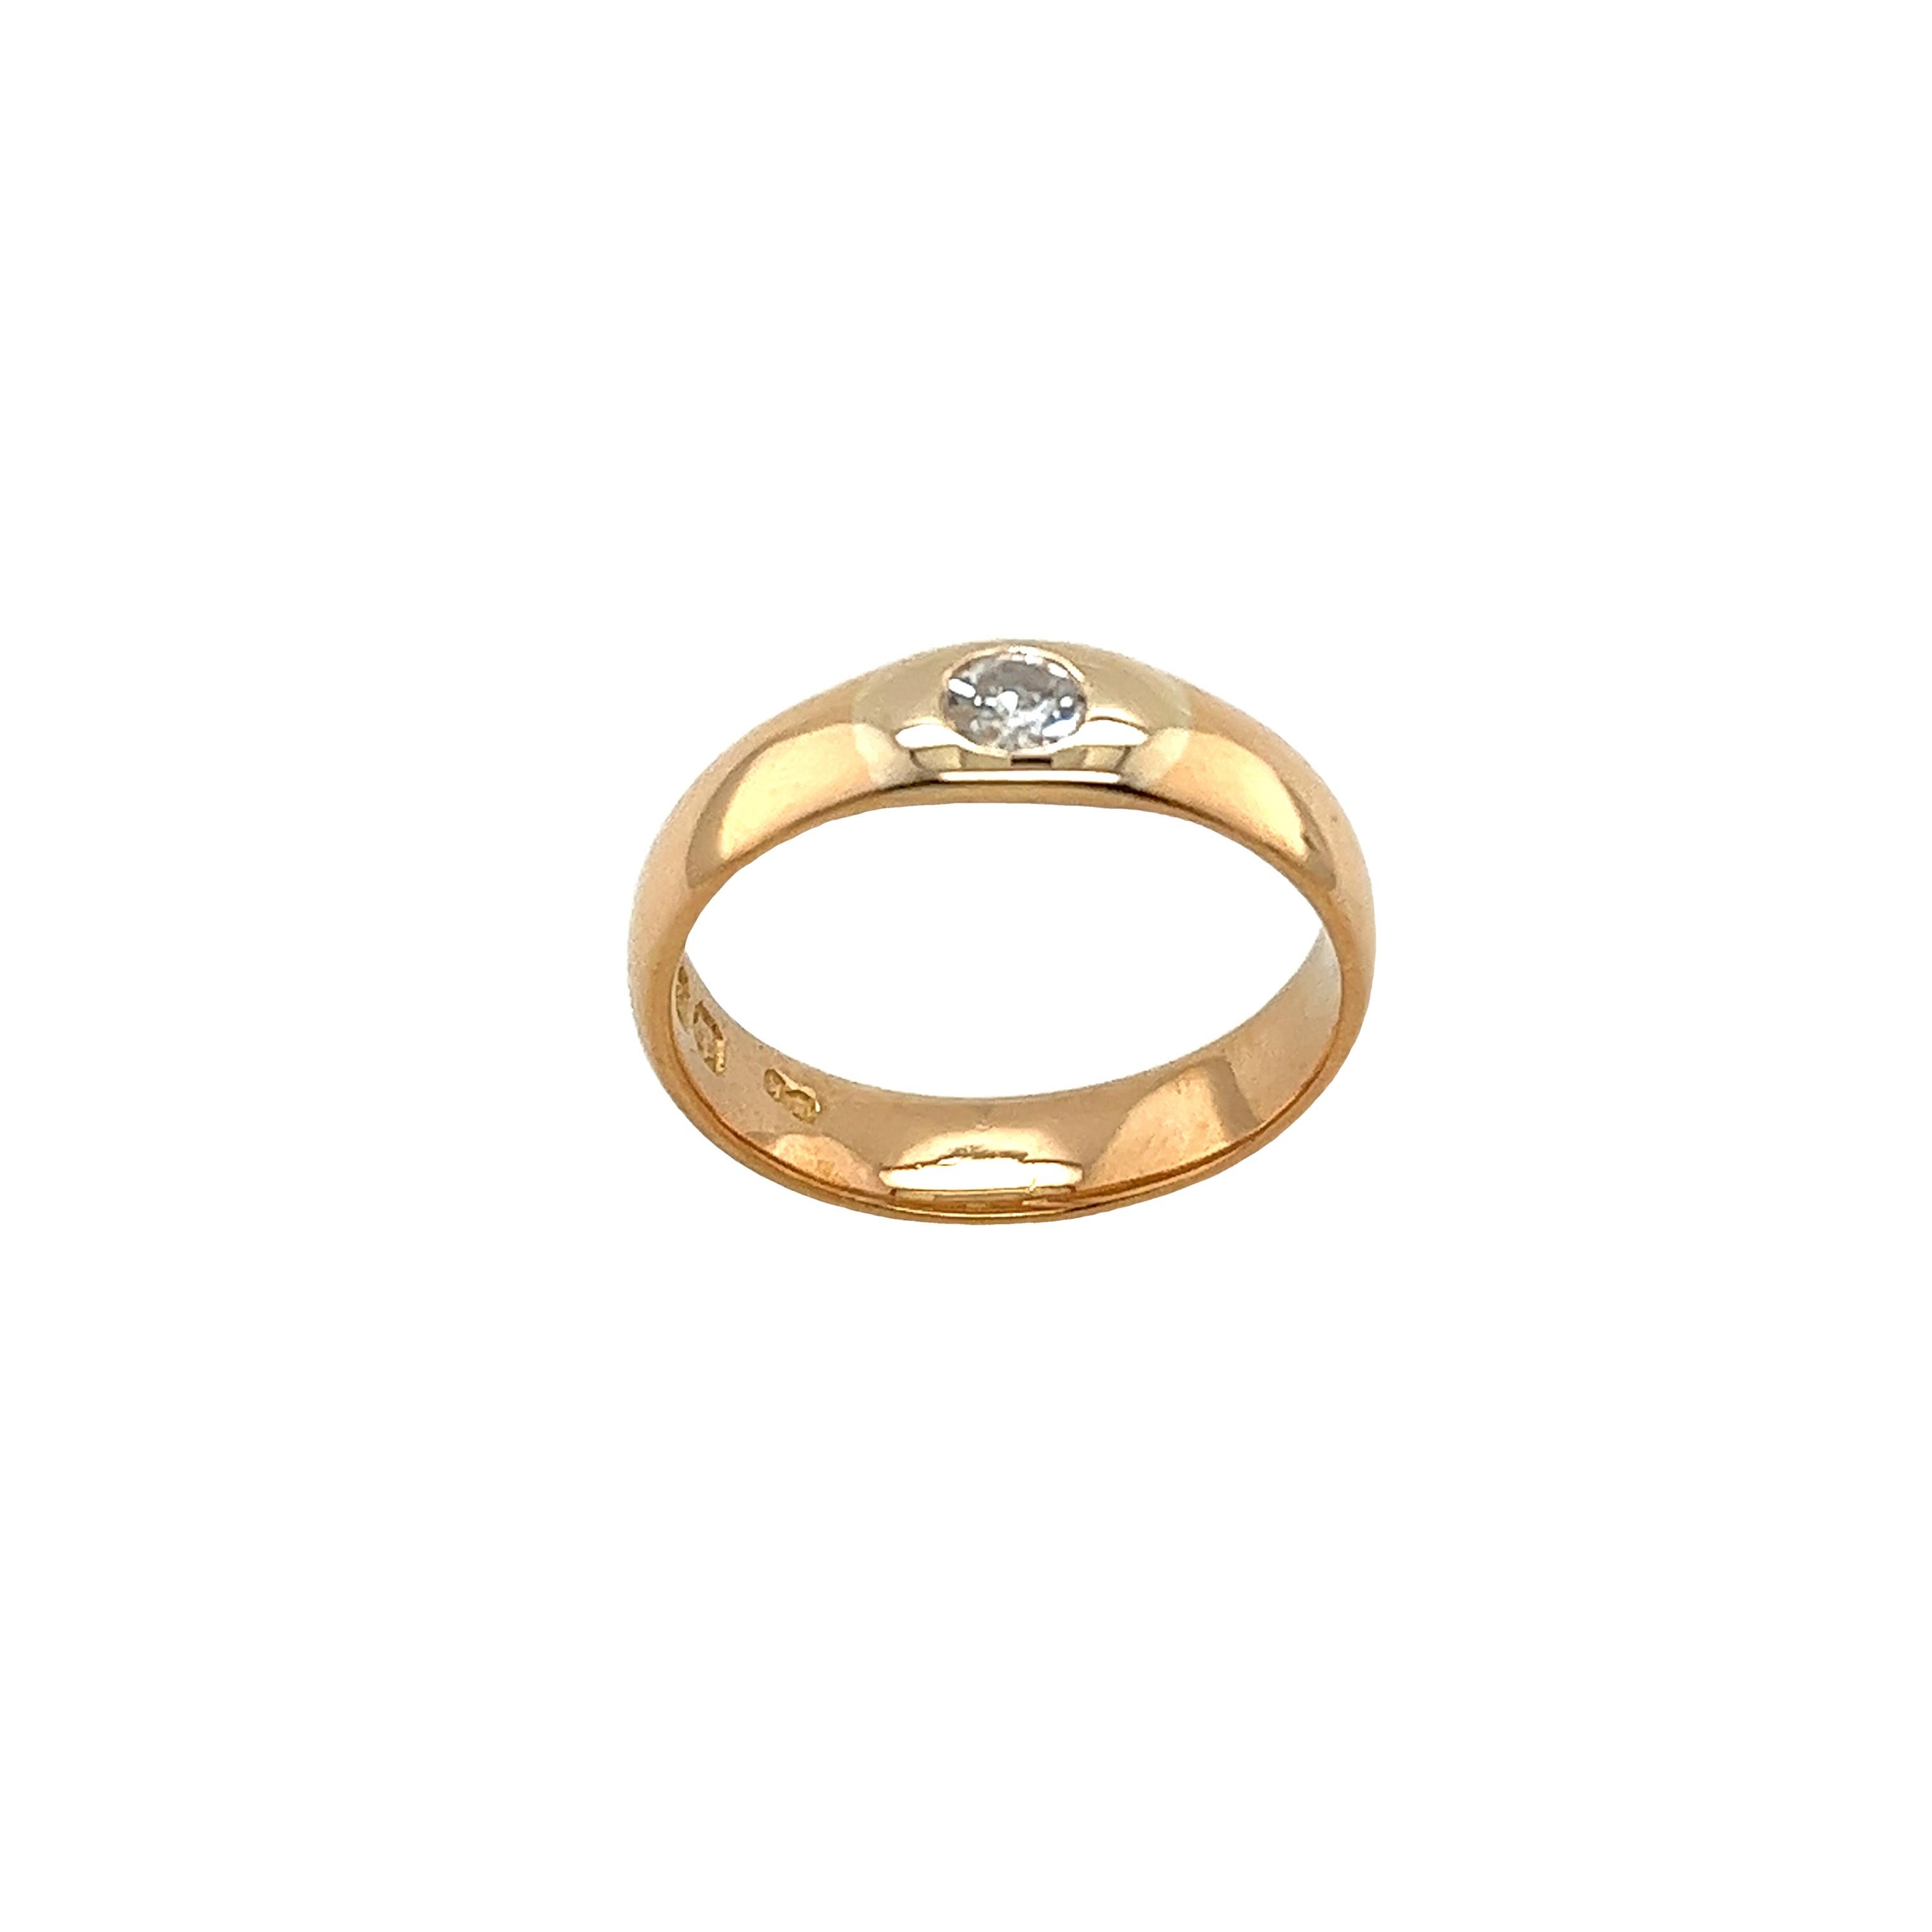 This 4.17mm wedding band set with 1 round brilliant cut diamond set in 22ct yellow gold setting.
Width of Band: 4.17mm
Total Weight: 4.4g
Total Diamond Weight: 0.17ct
Diamond Colour: H
Diamond Clarity: SI
Ring Size: K
SMS9164